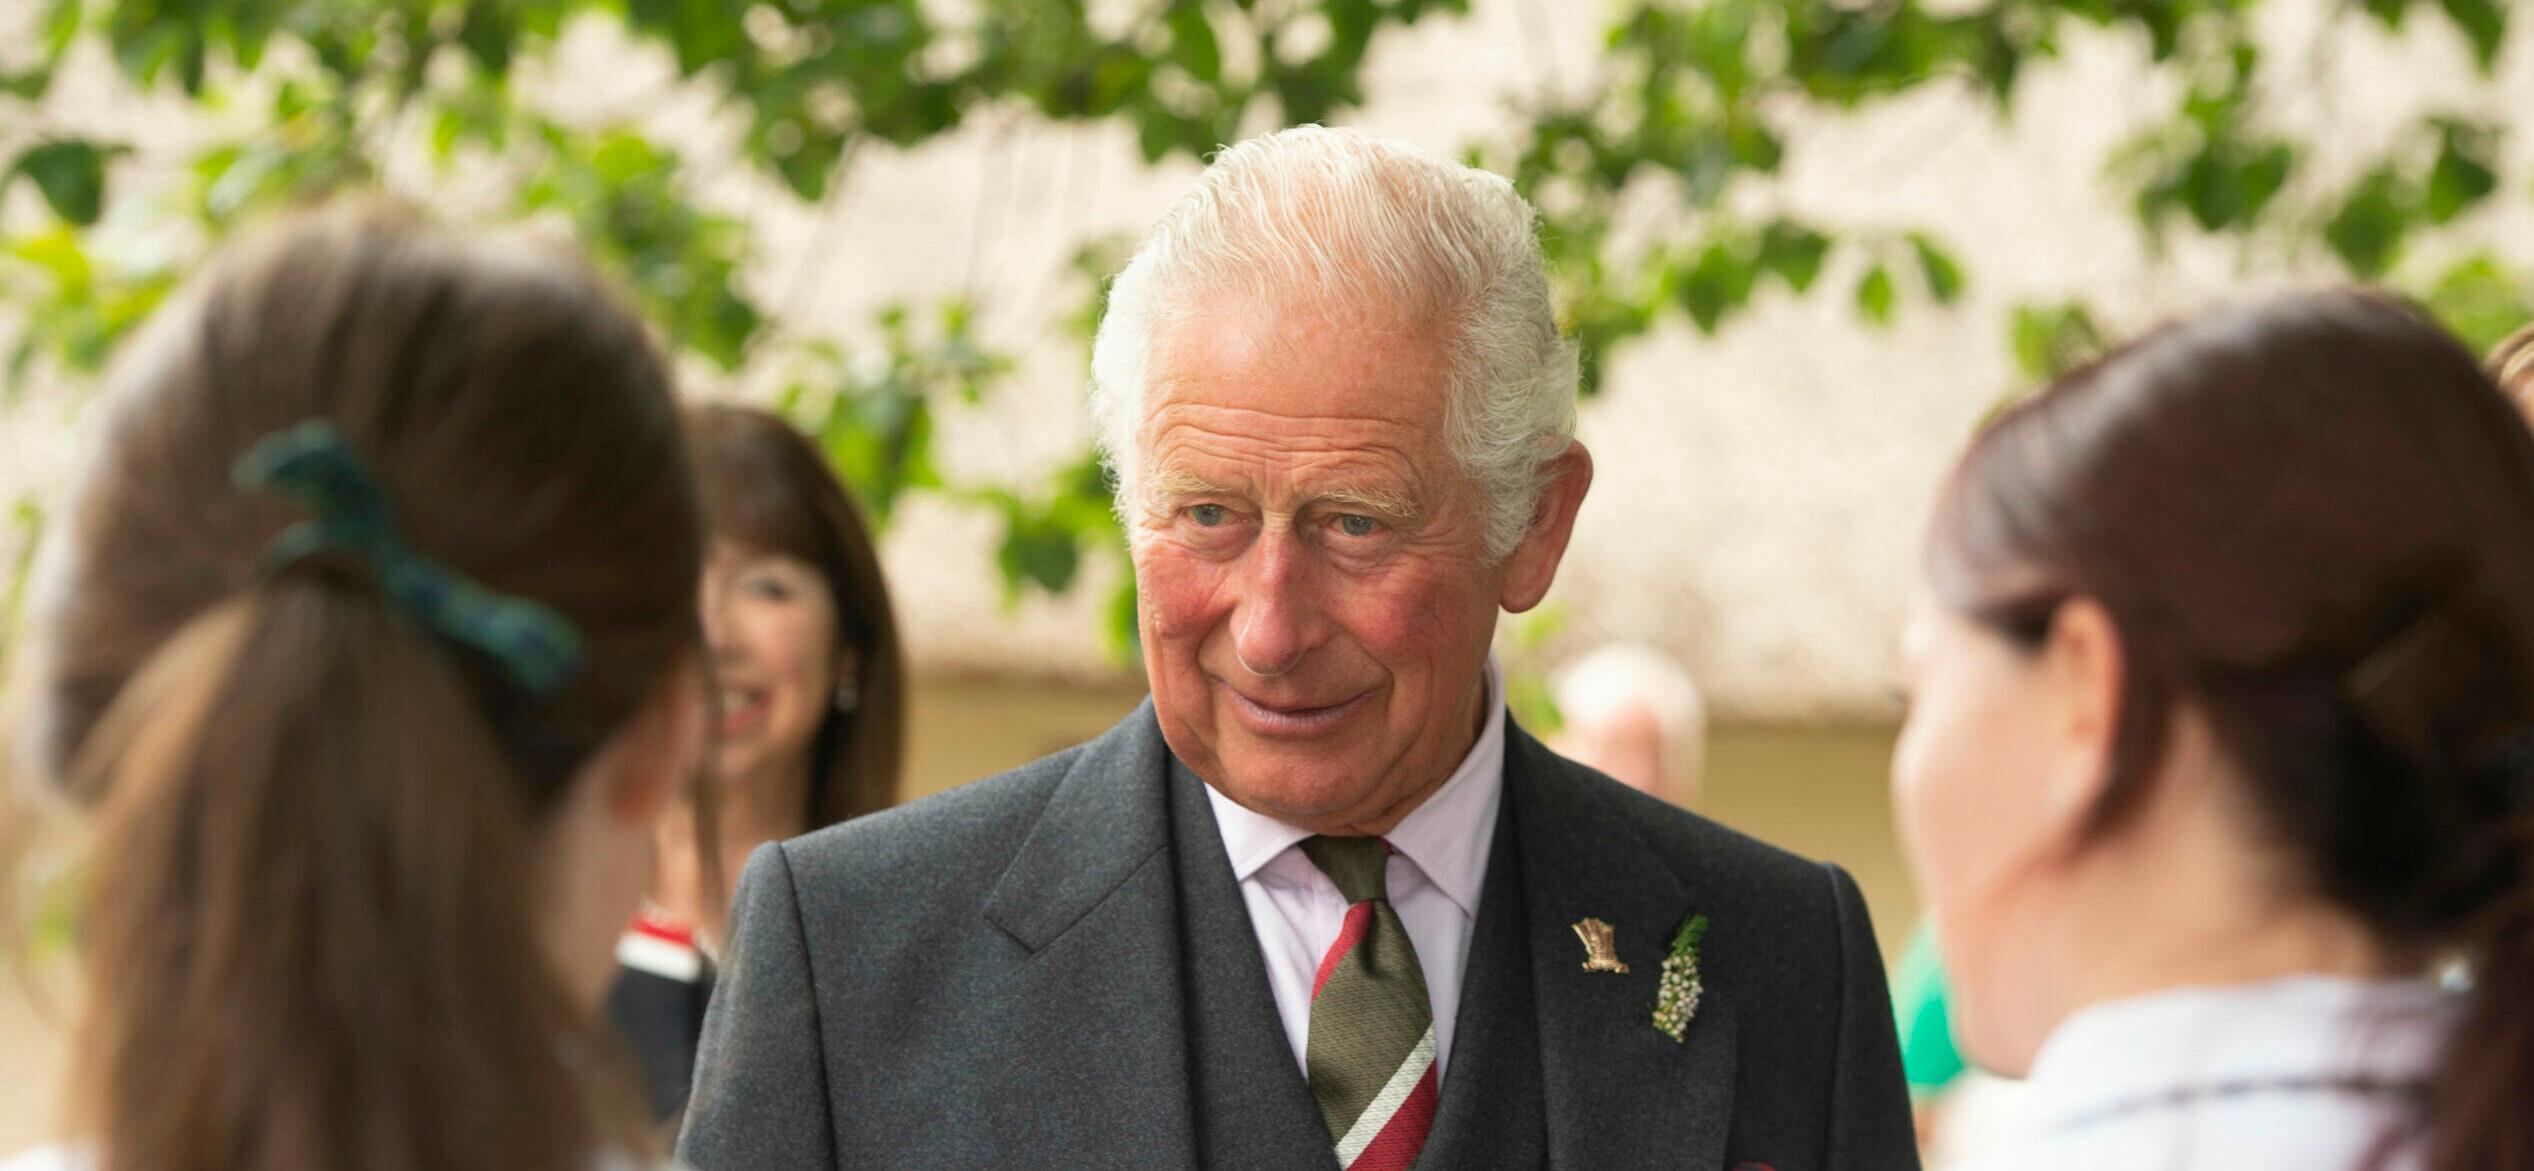 Prince Charles And Amazon Prime Video Come Together For A Sustainable Planet